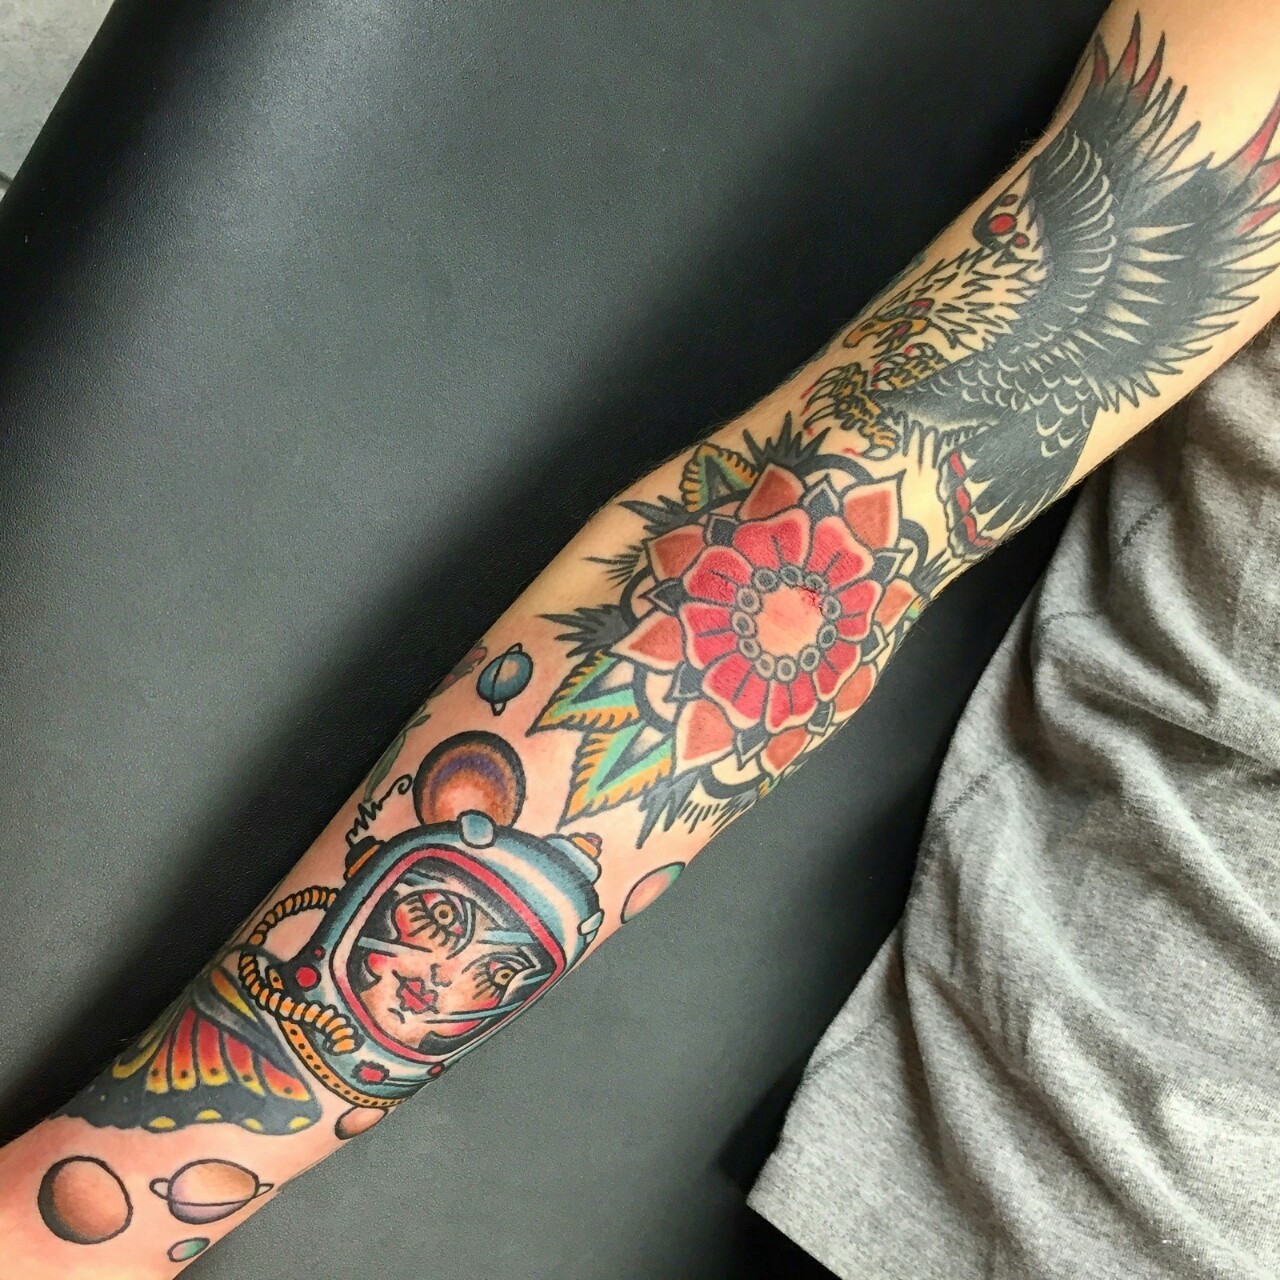 1st TattooAmerican Traditional full sleeve hand and knuckles inked by  Oliver Peck at Elm Street Tattoo Dallas Texas 5 hour session to complete  full outline Next session shading followed by third and